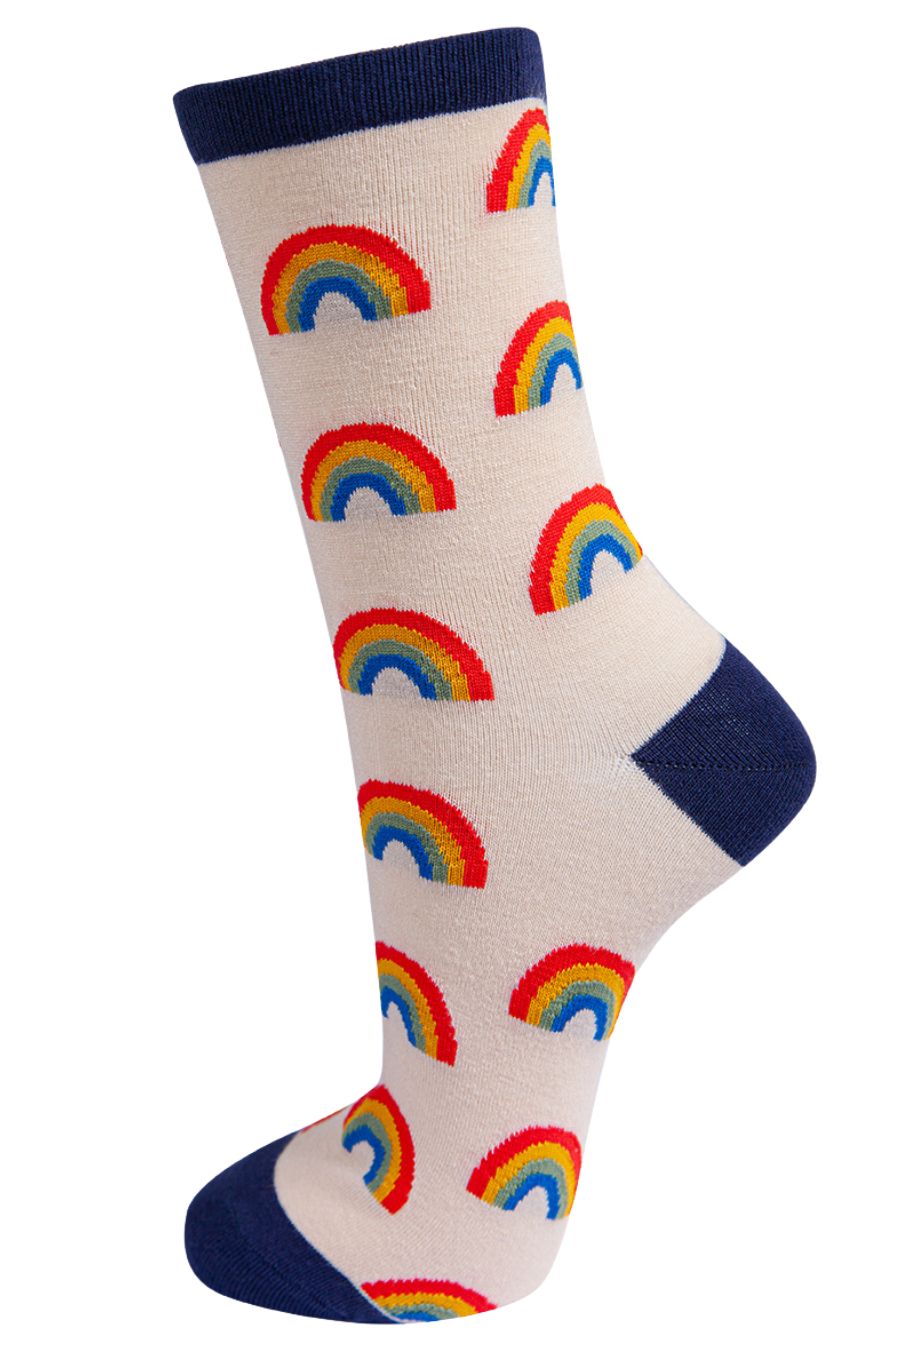 cream, navy blue ankle socks with mutlicoloured rainbows all over